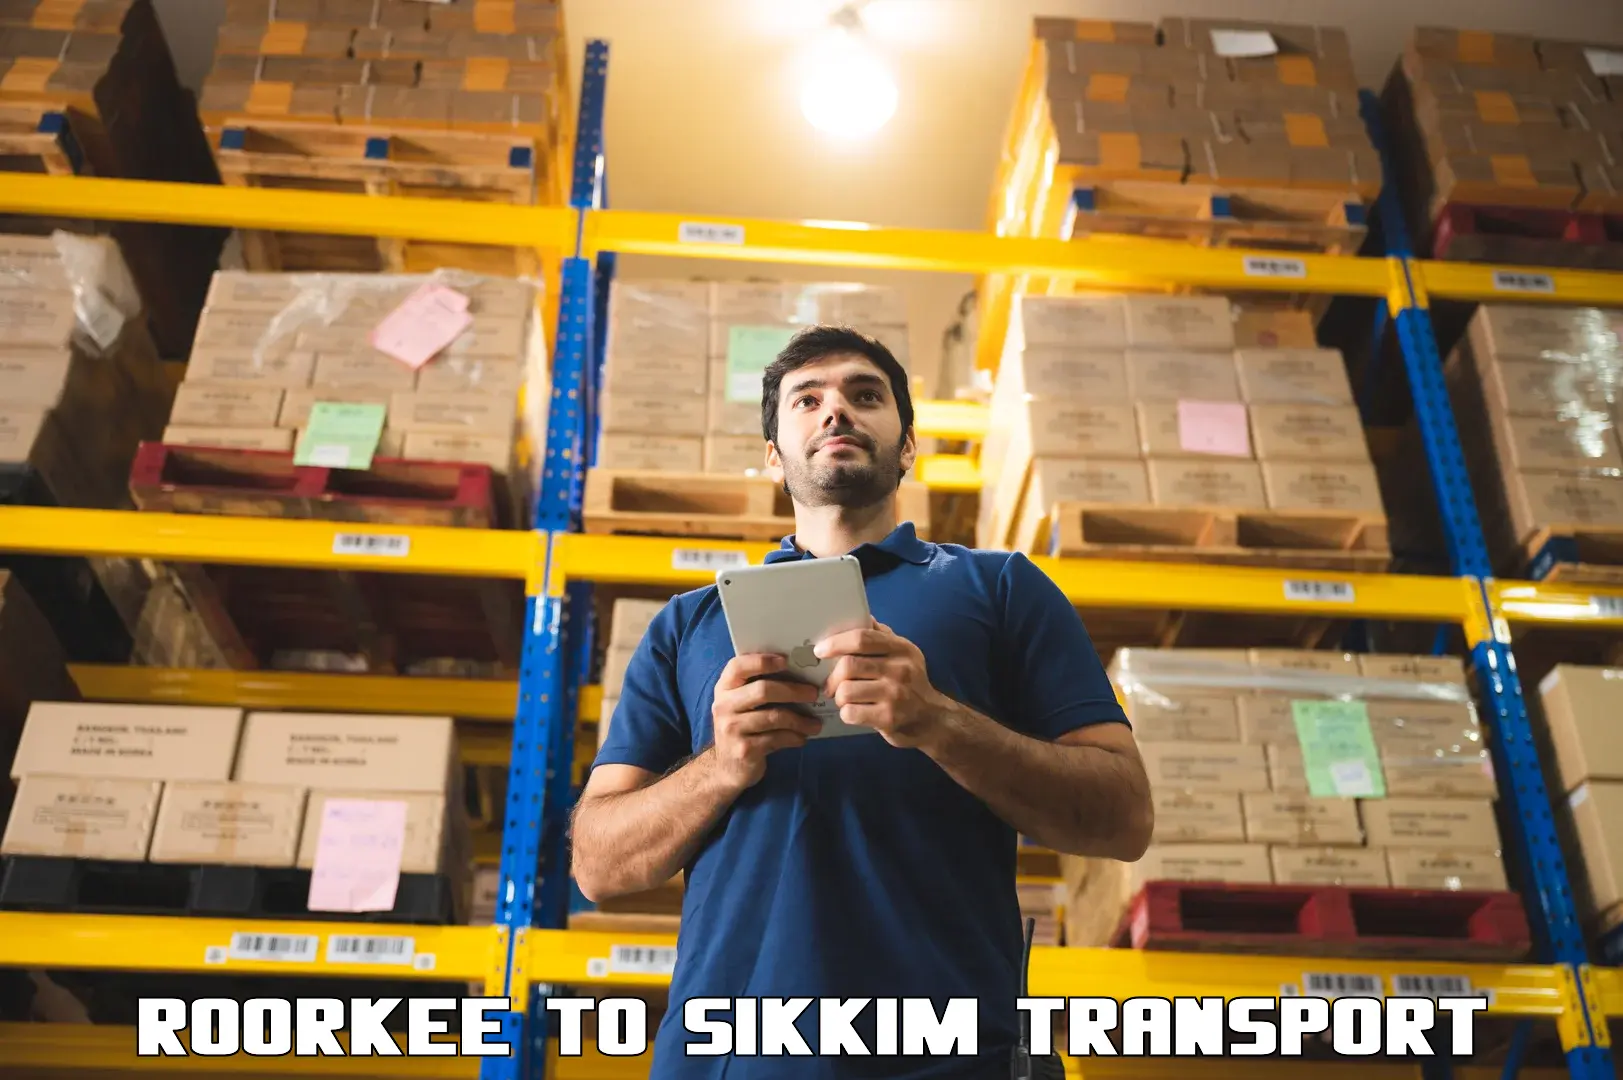 Shipping partner Roorkee to West Sikkim